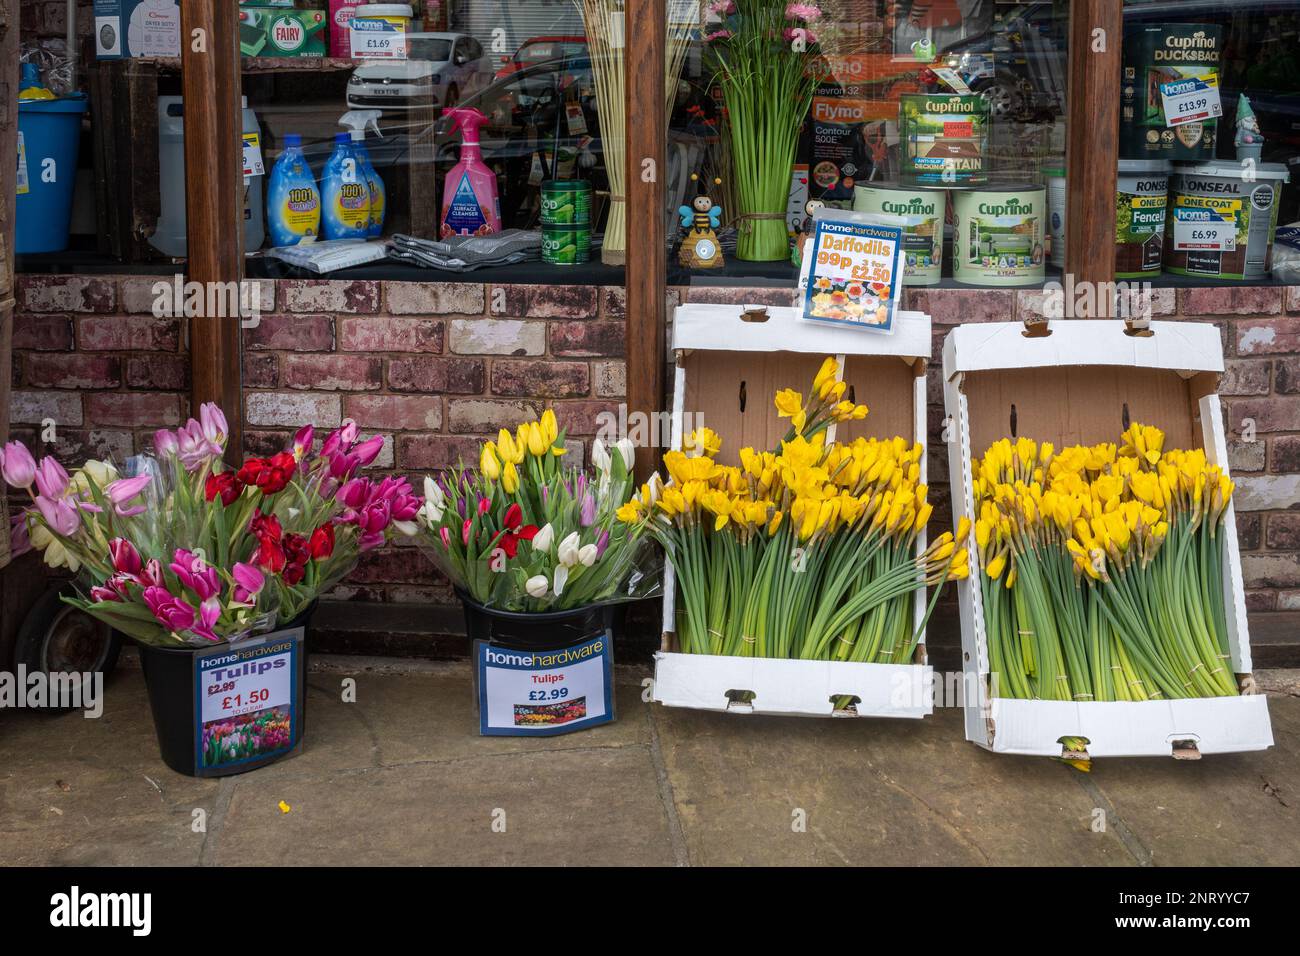 Tulips and daffodils, bunches of spring flowers for sale at a village shop, England, UK Stock Photo